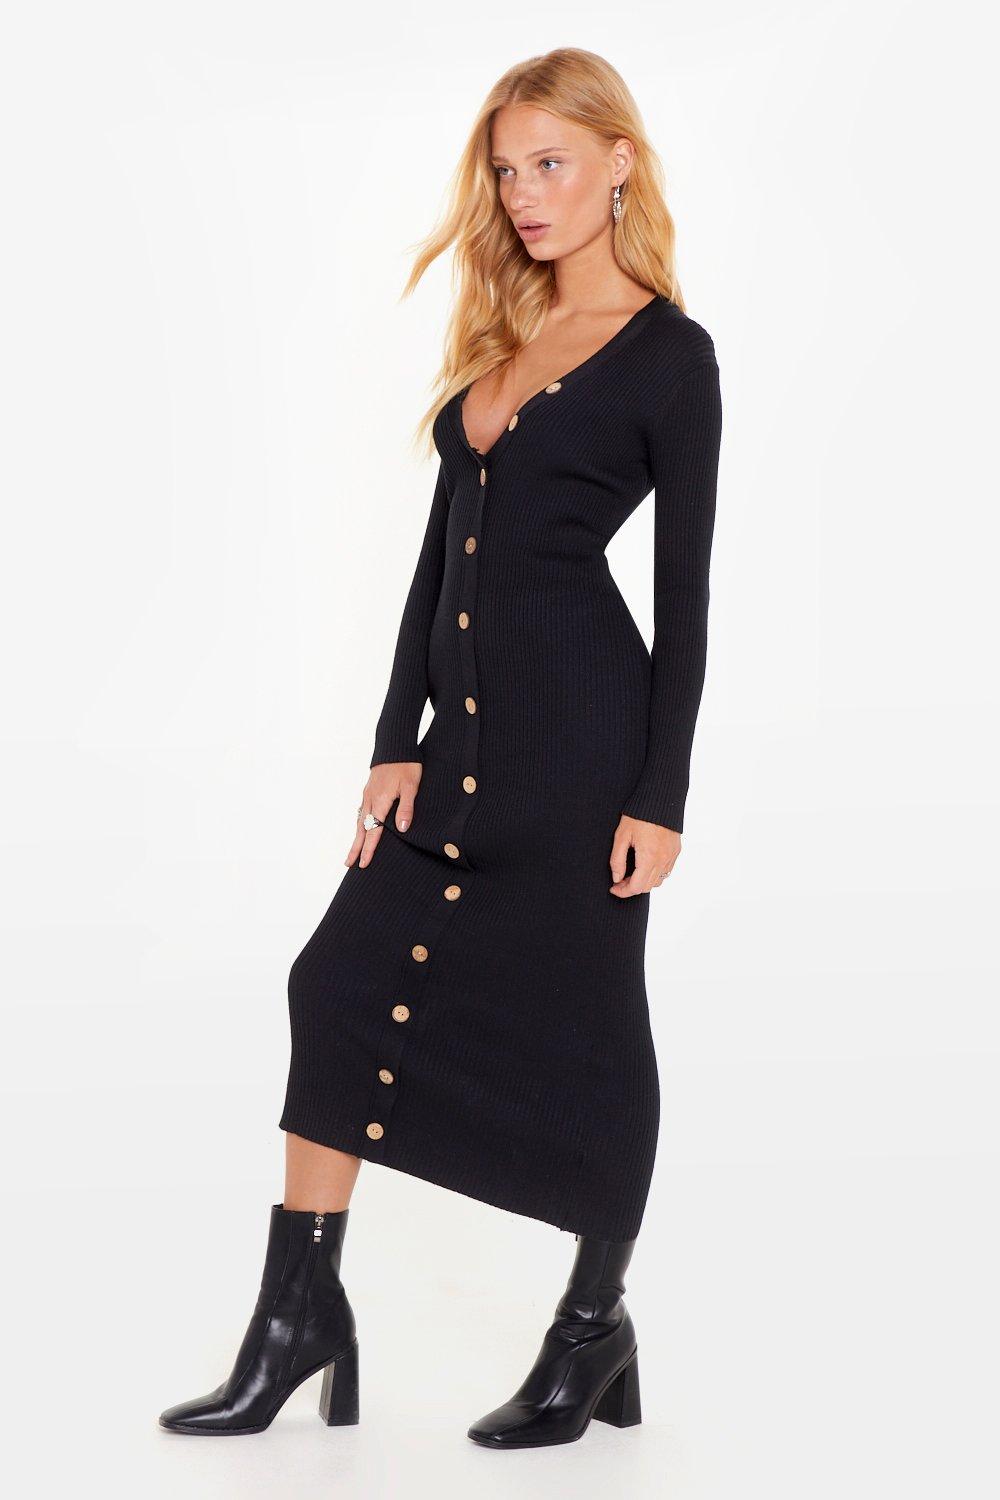 black button down dress with sleeves